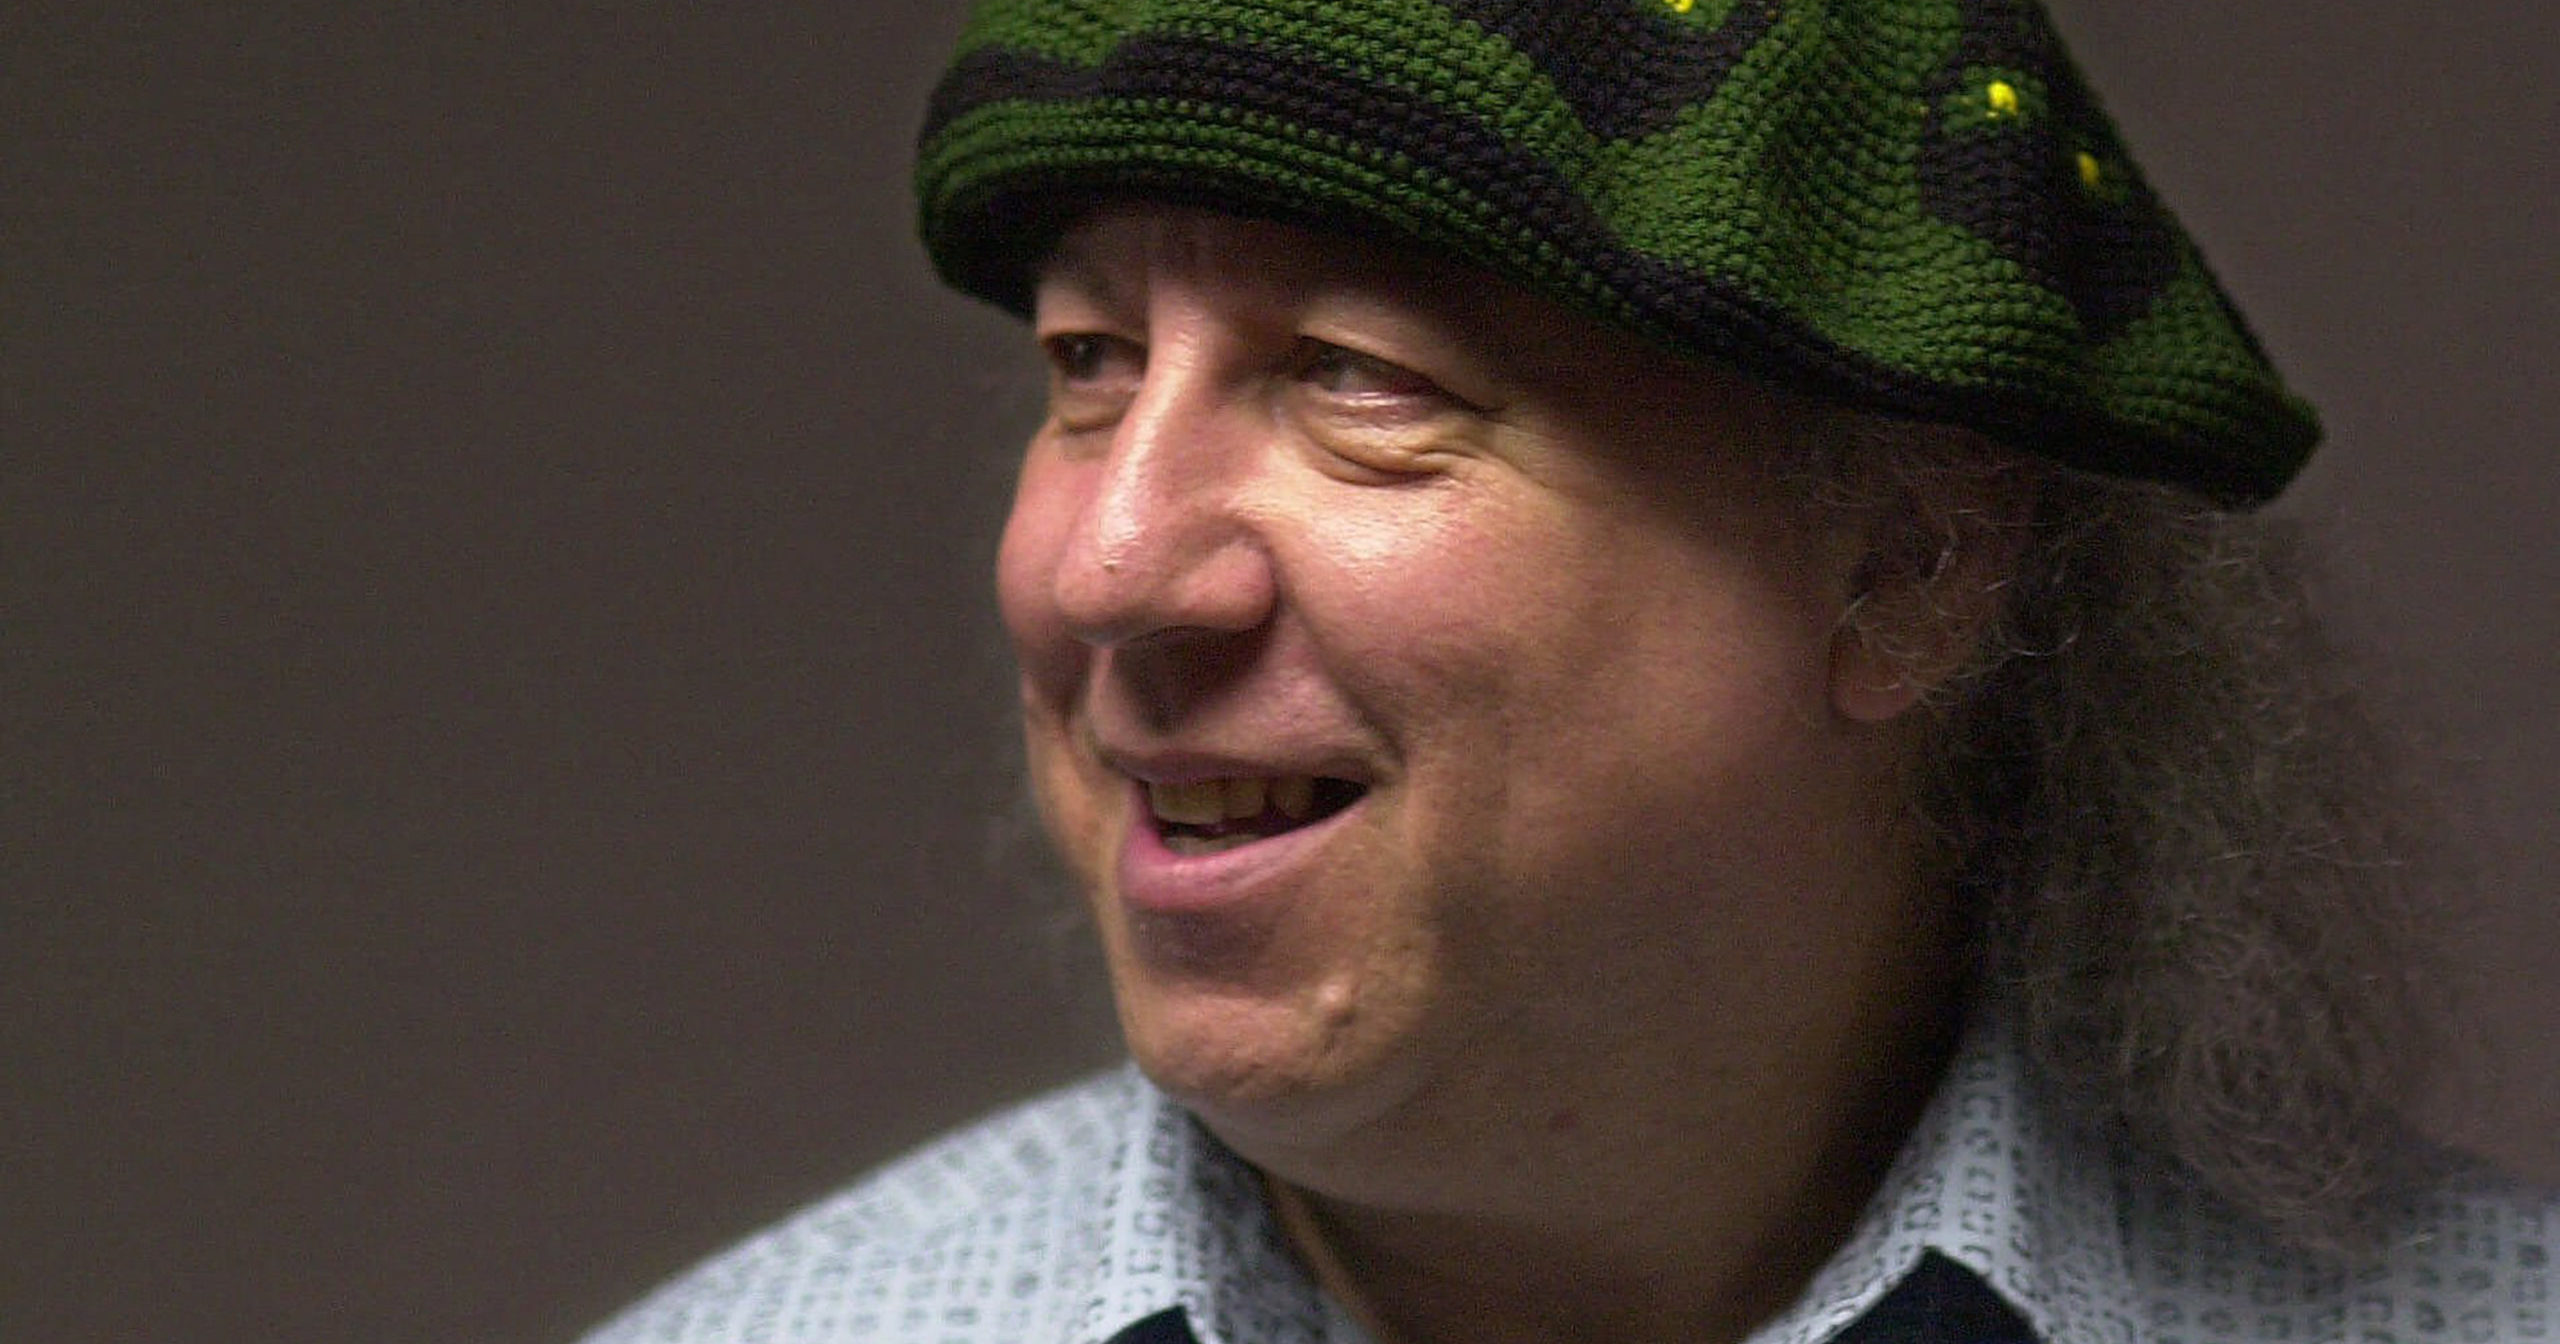 This file photo dated April 7, 2001, shows British rock and blues guitarist Peter Green, a founding member of Fleetwood Mac, backstage before performing with Peter Green's Splinter Group at B.B. King Blues Club & Grill in New York. Lawyers representing the family of Peter Green said in a statement on July 25, 2020, that he has died, aged 73.